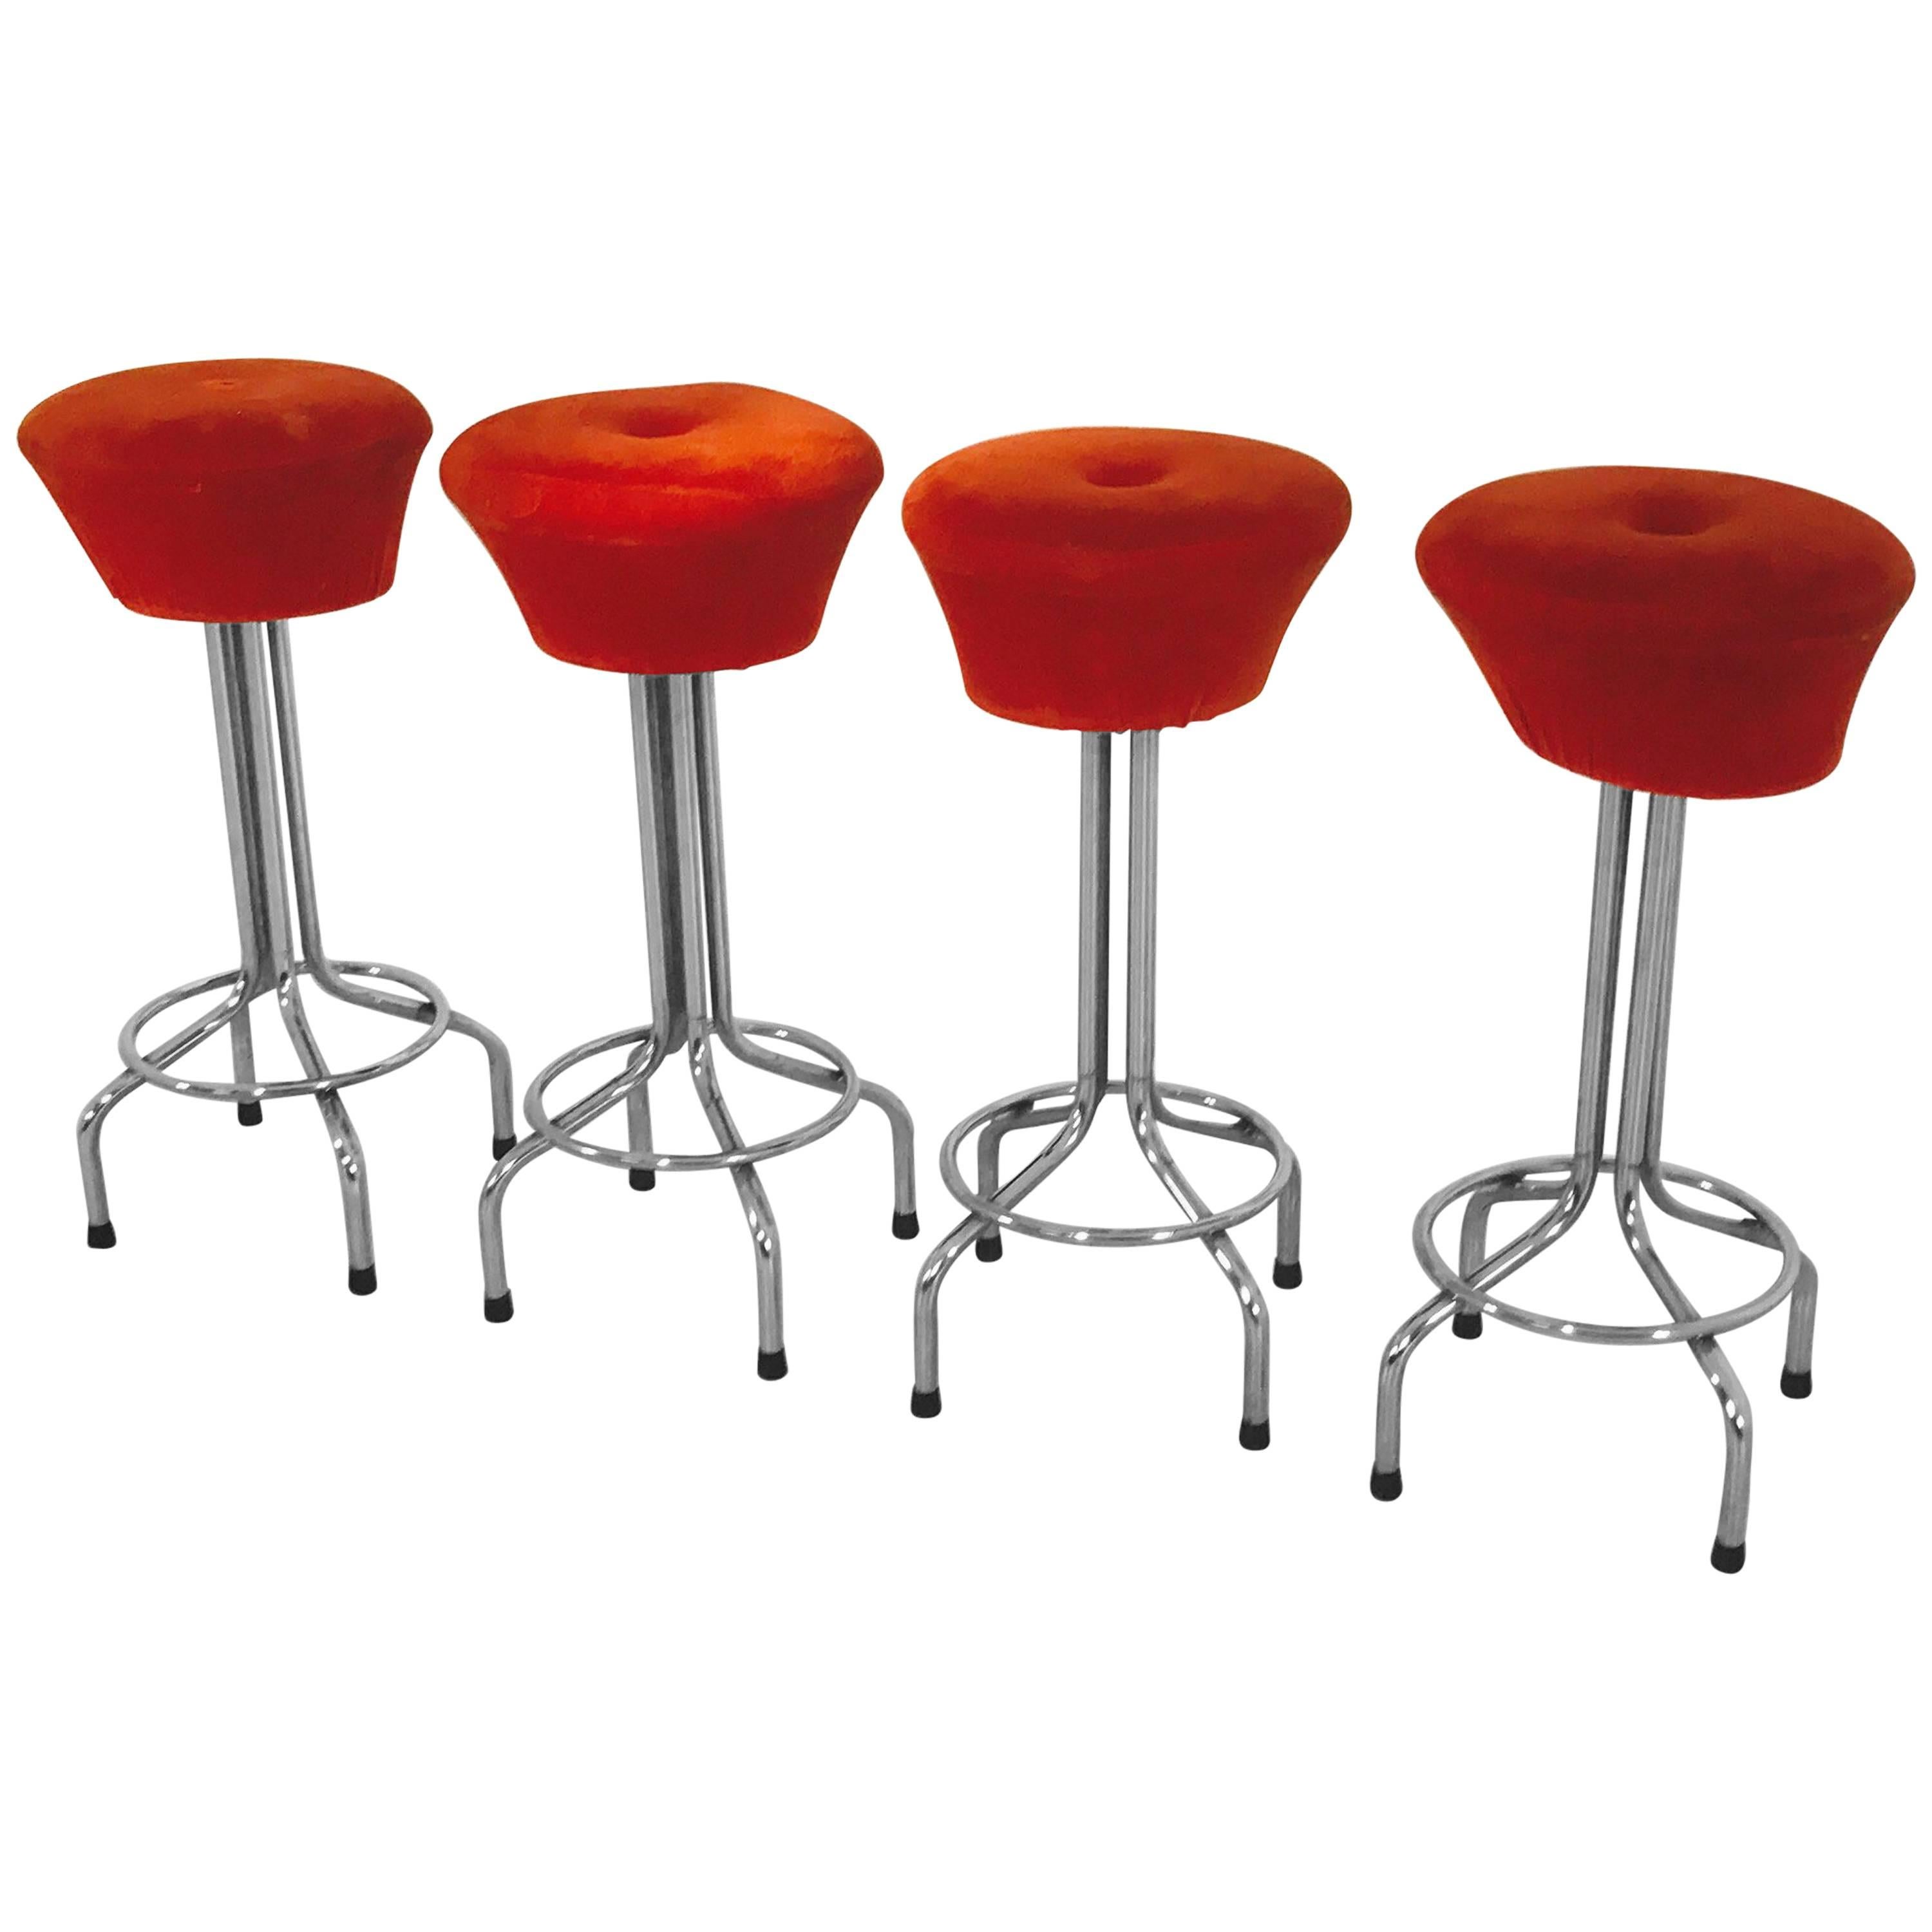 Vintage Barstools from 1960